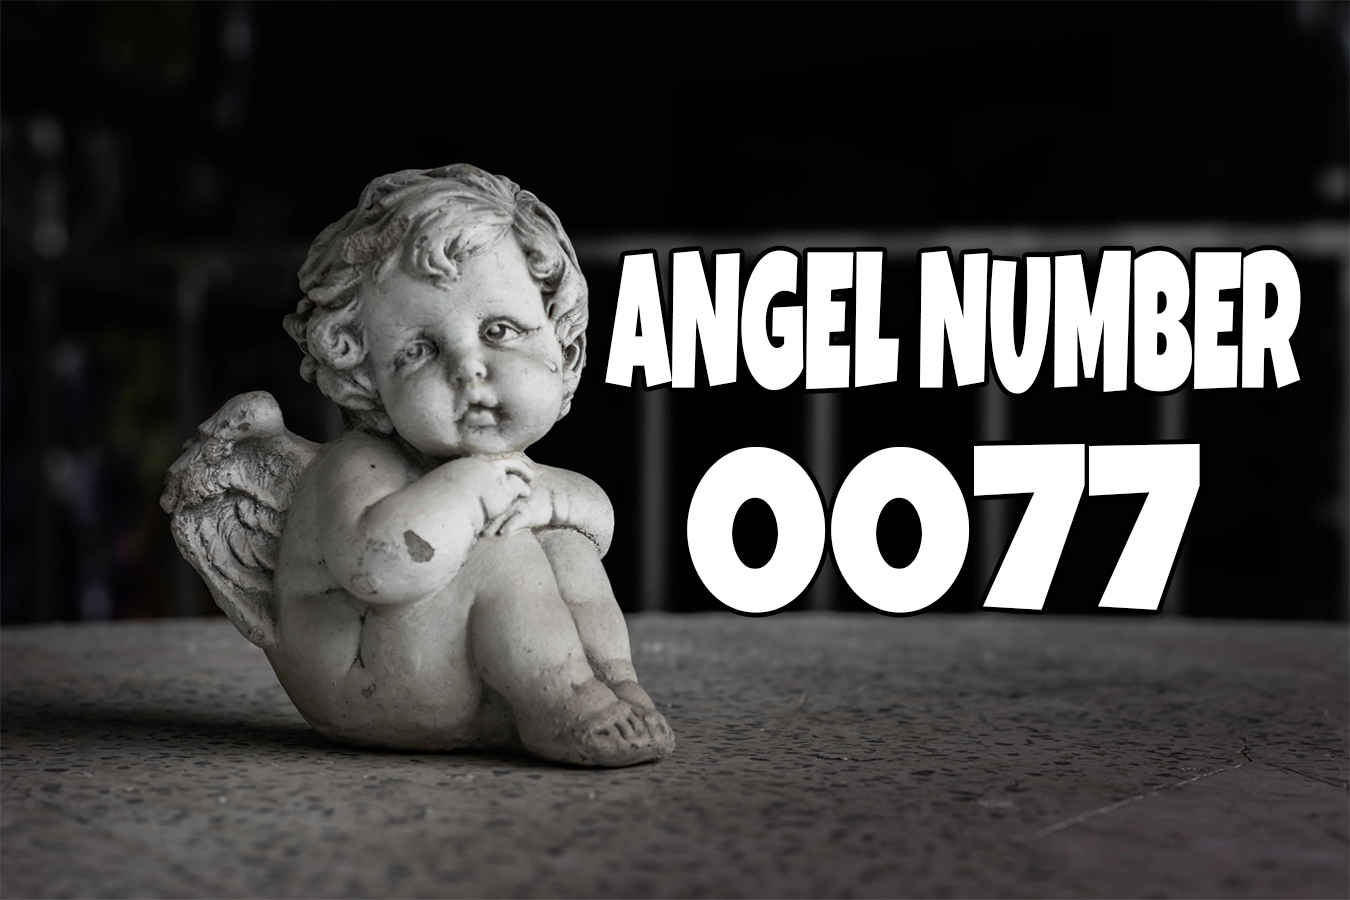 Angel Number 0077 Meaning